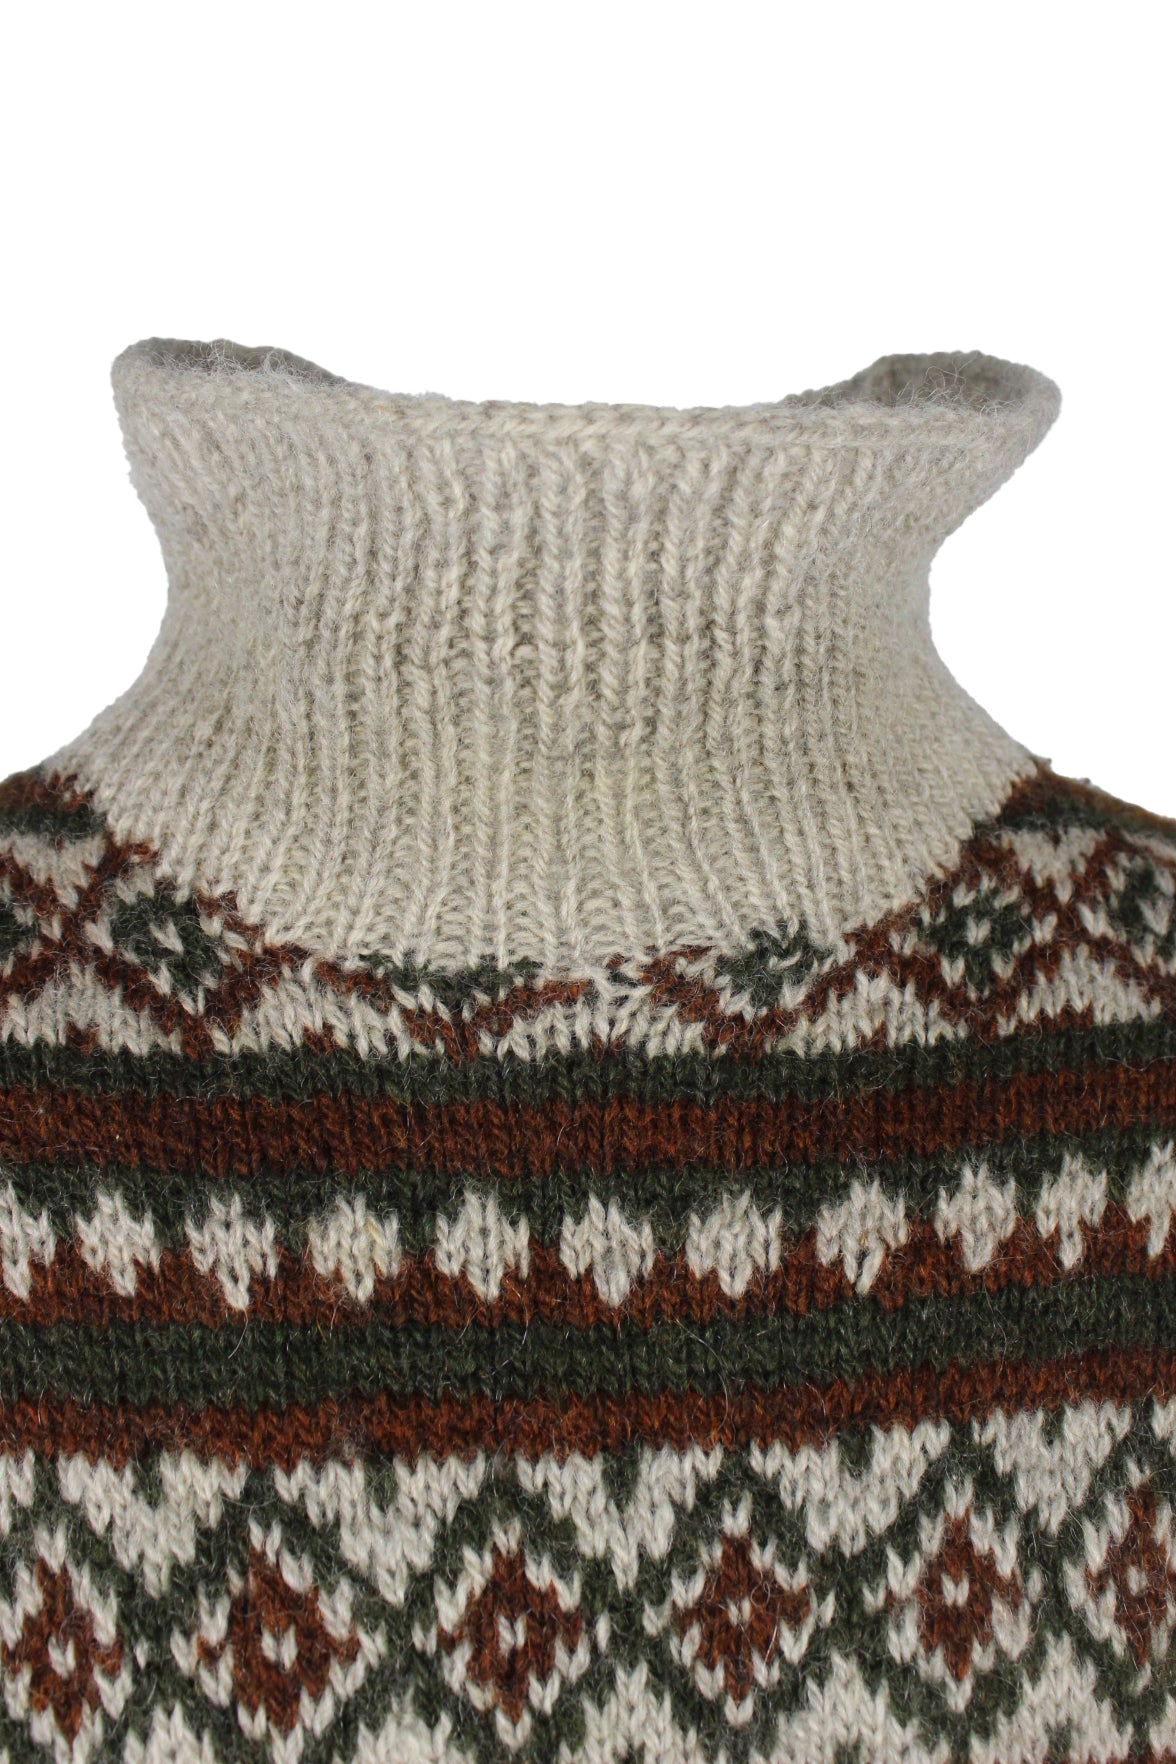 detail view of ribbed collar popped up.